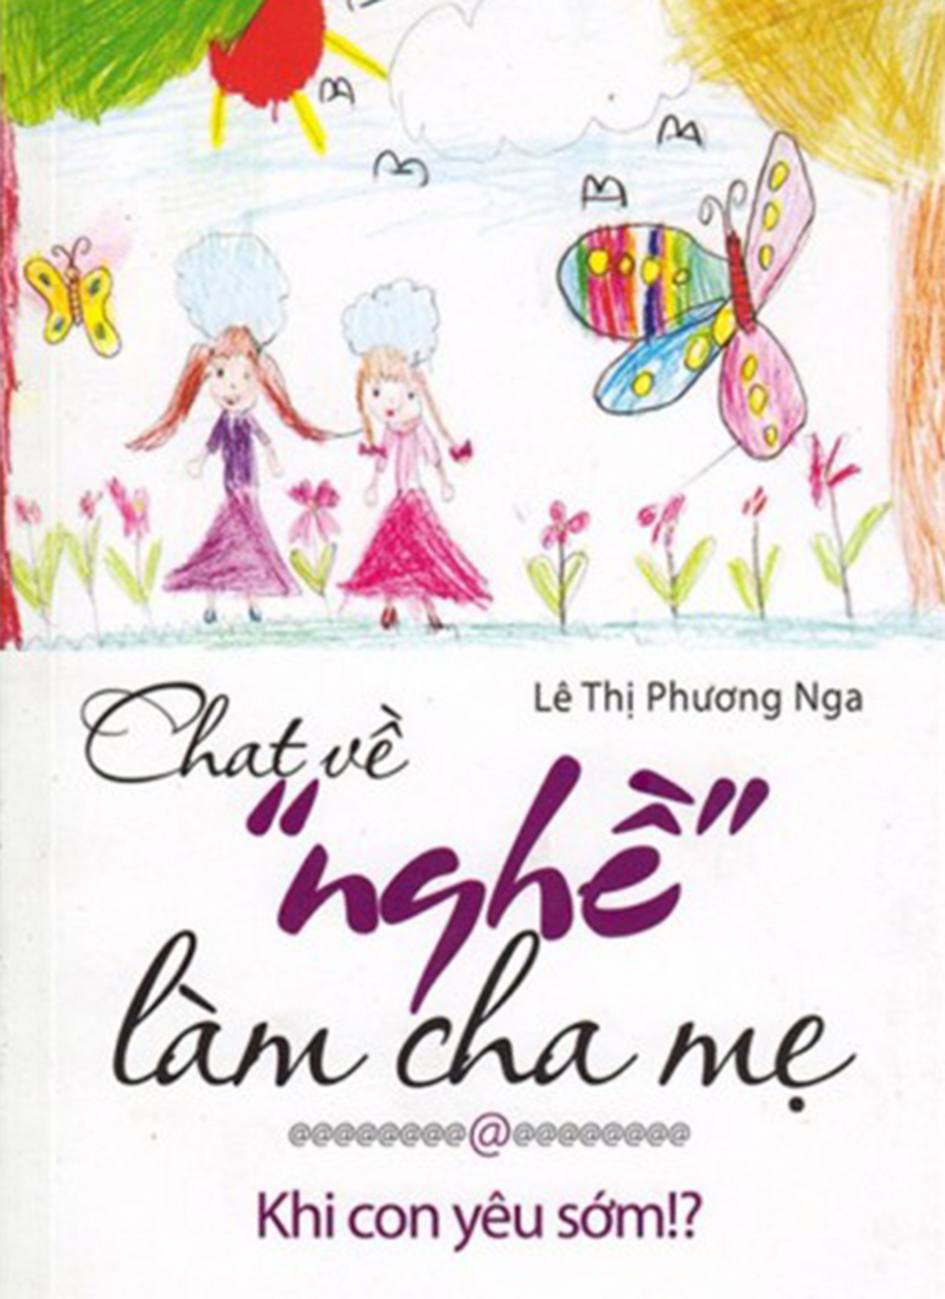 chat ve nghe lam cha me